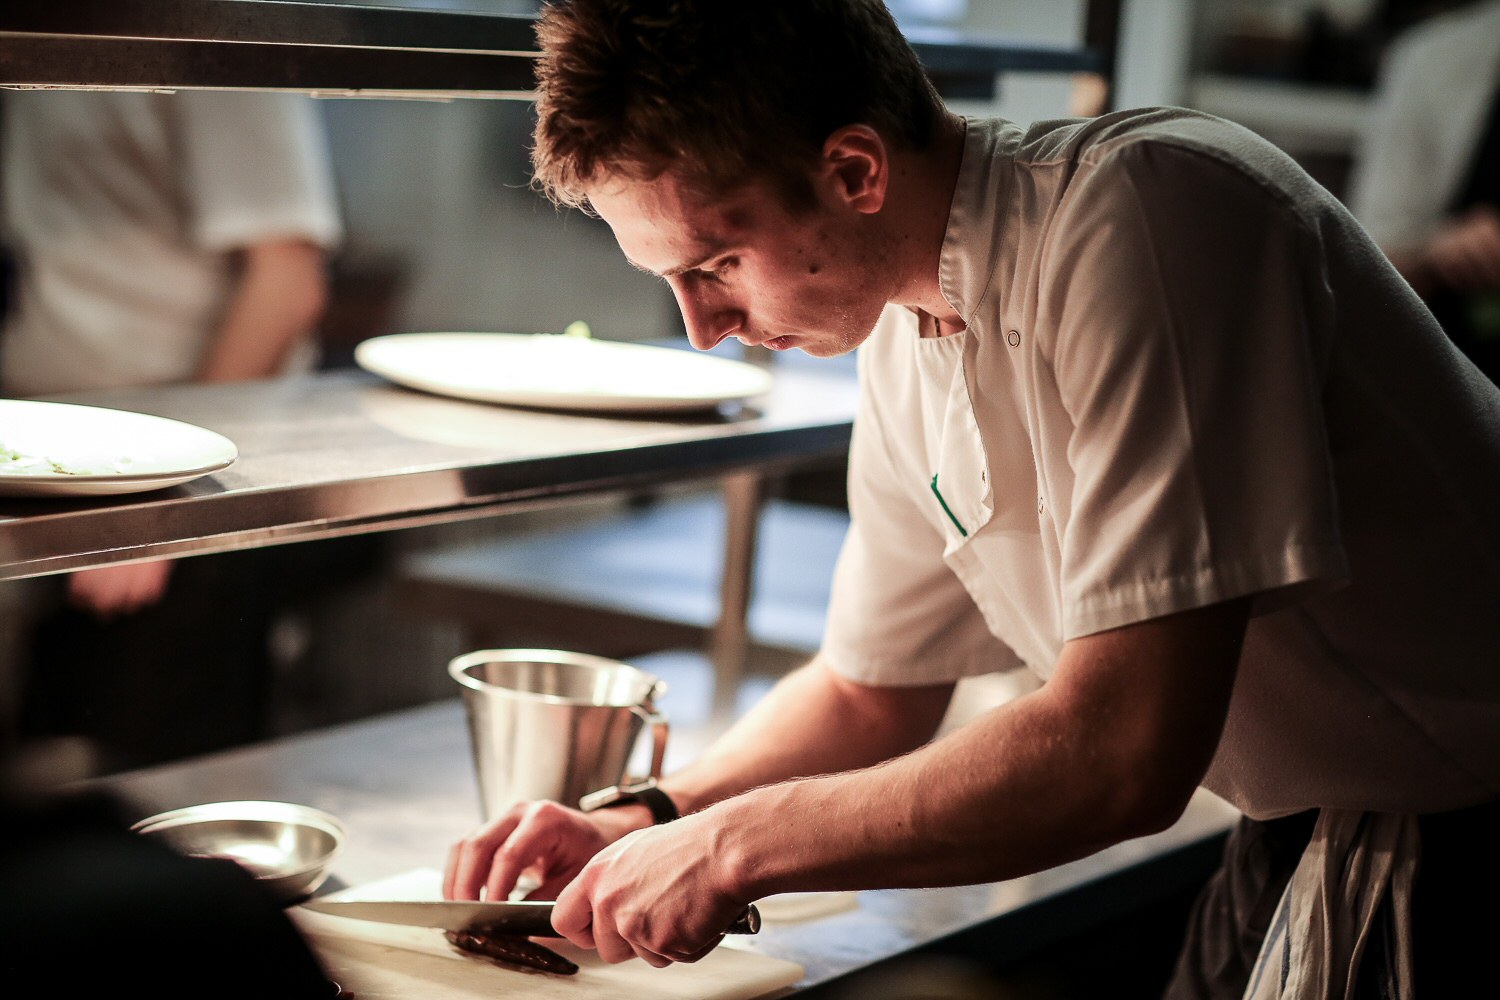 Painstaking detail, a Chef hard at Work